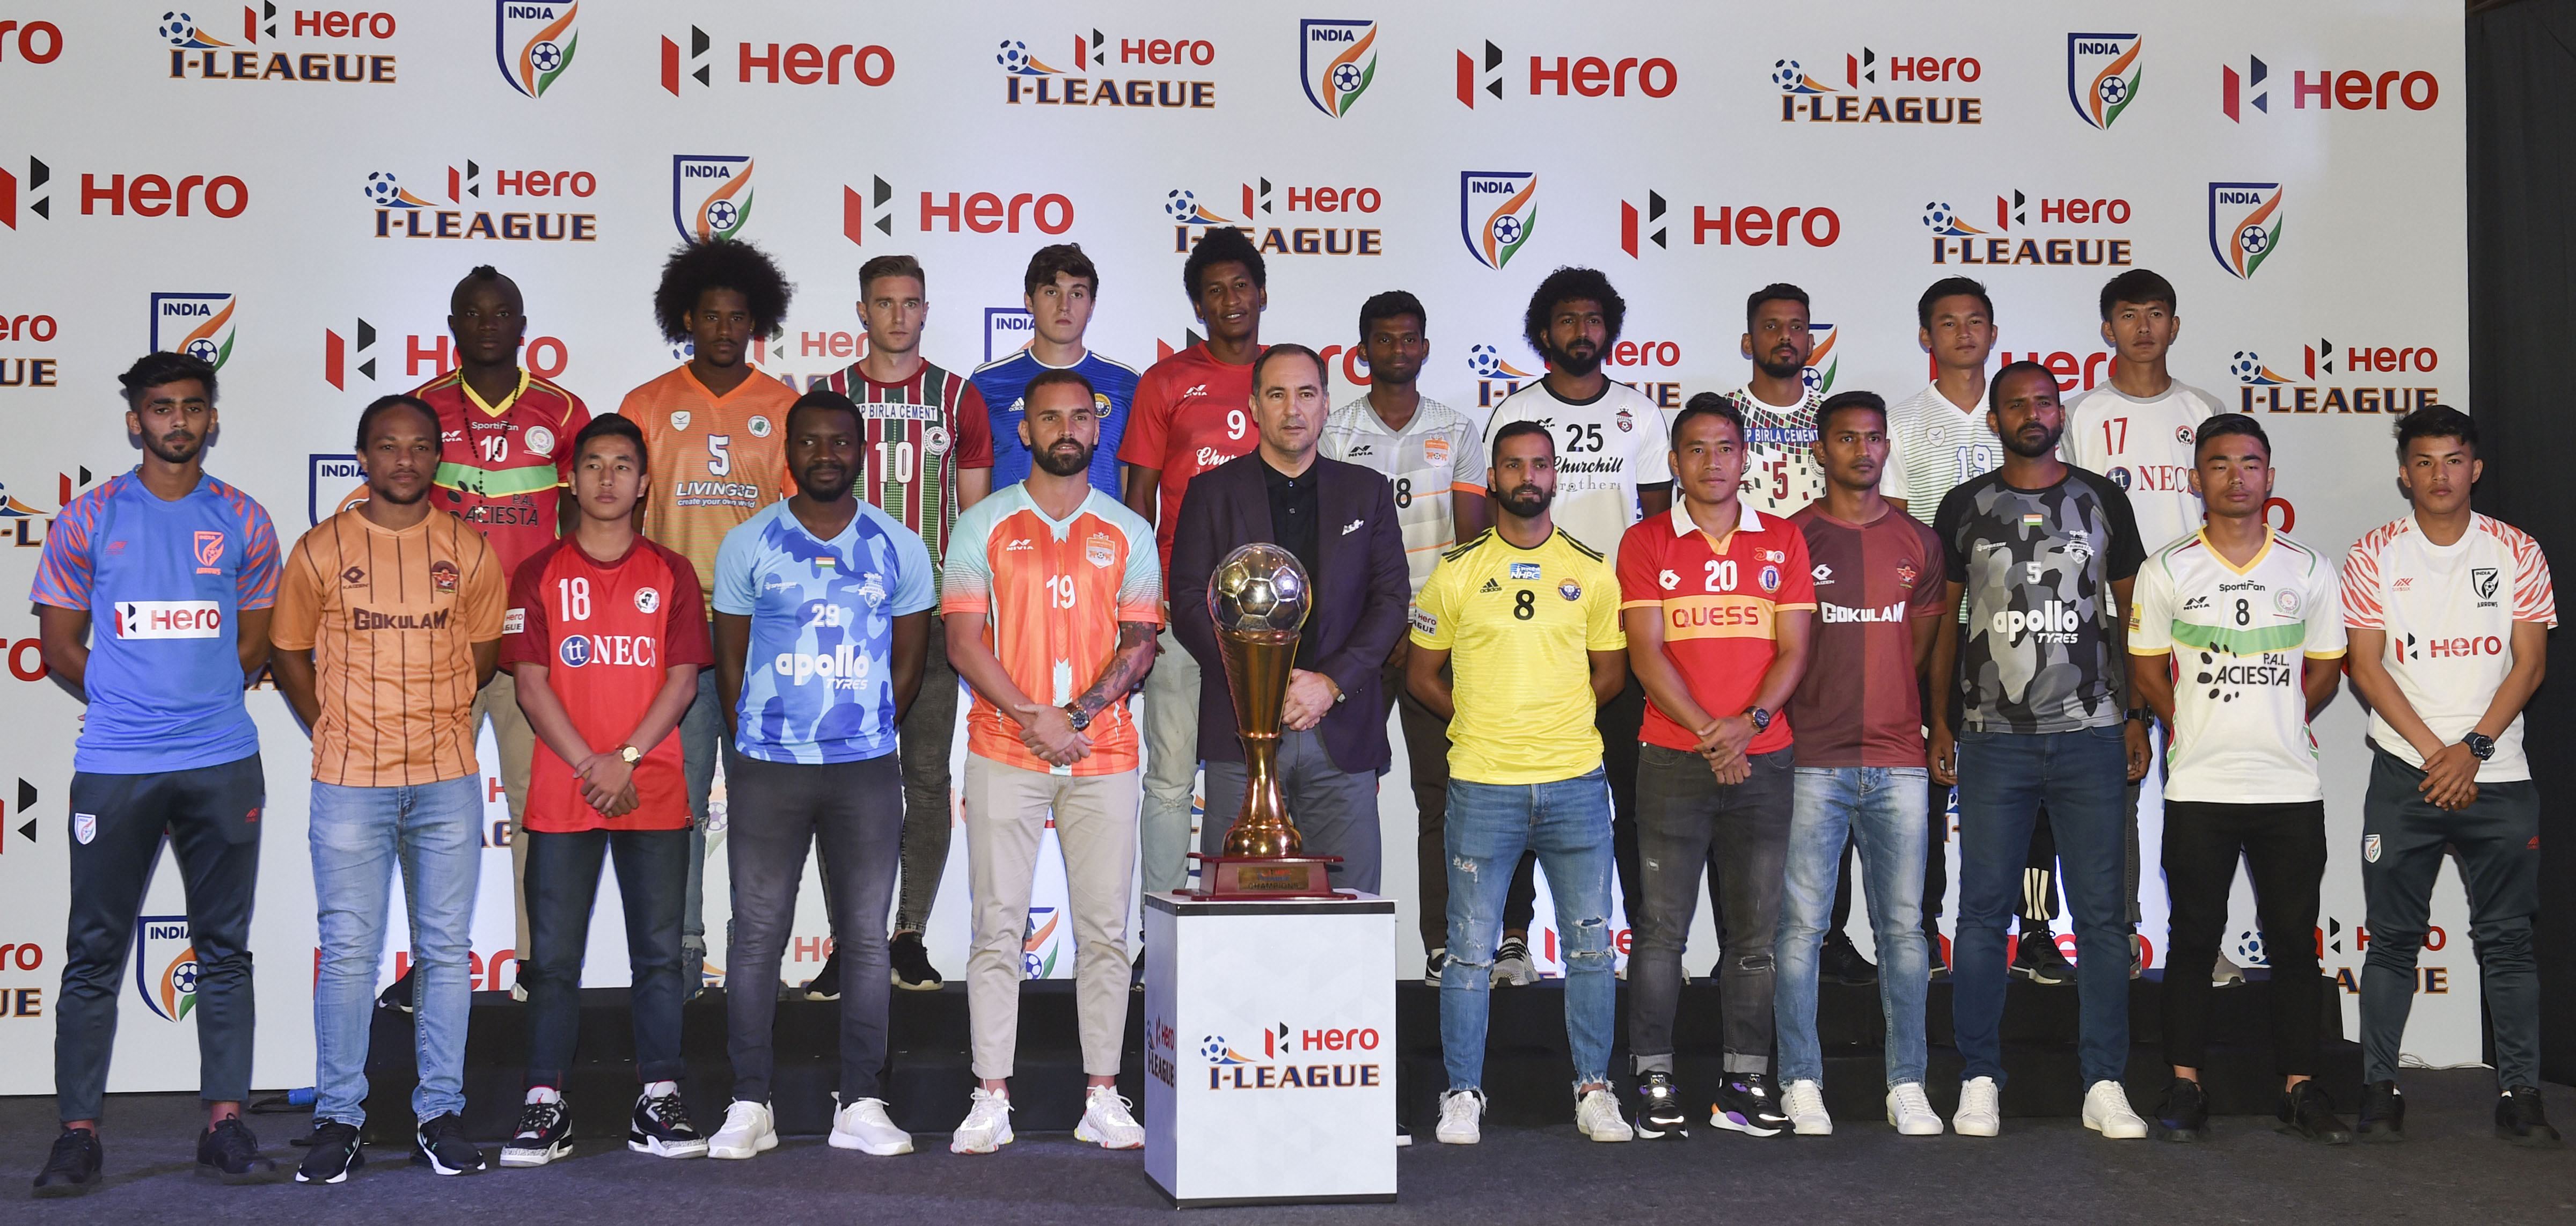 Indian football team coach Igor Stimac along with 11 team members pose for a group photograph during the 13th edition of the Hero I-League official launch -PTI